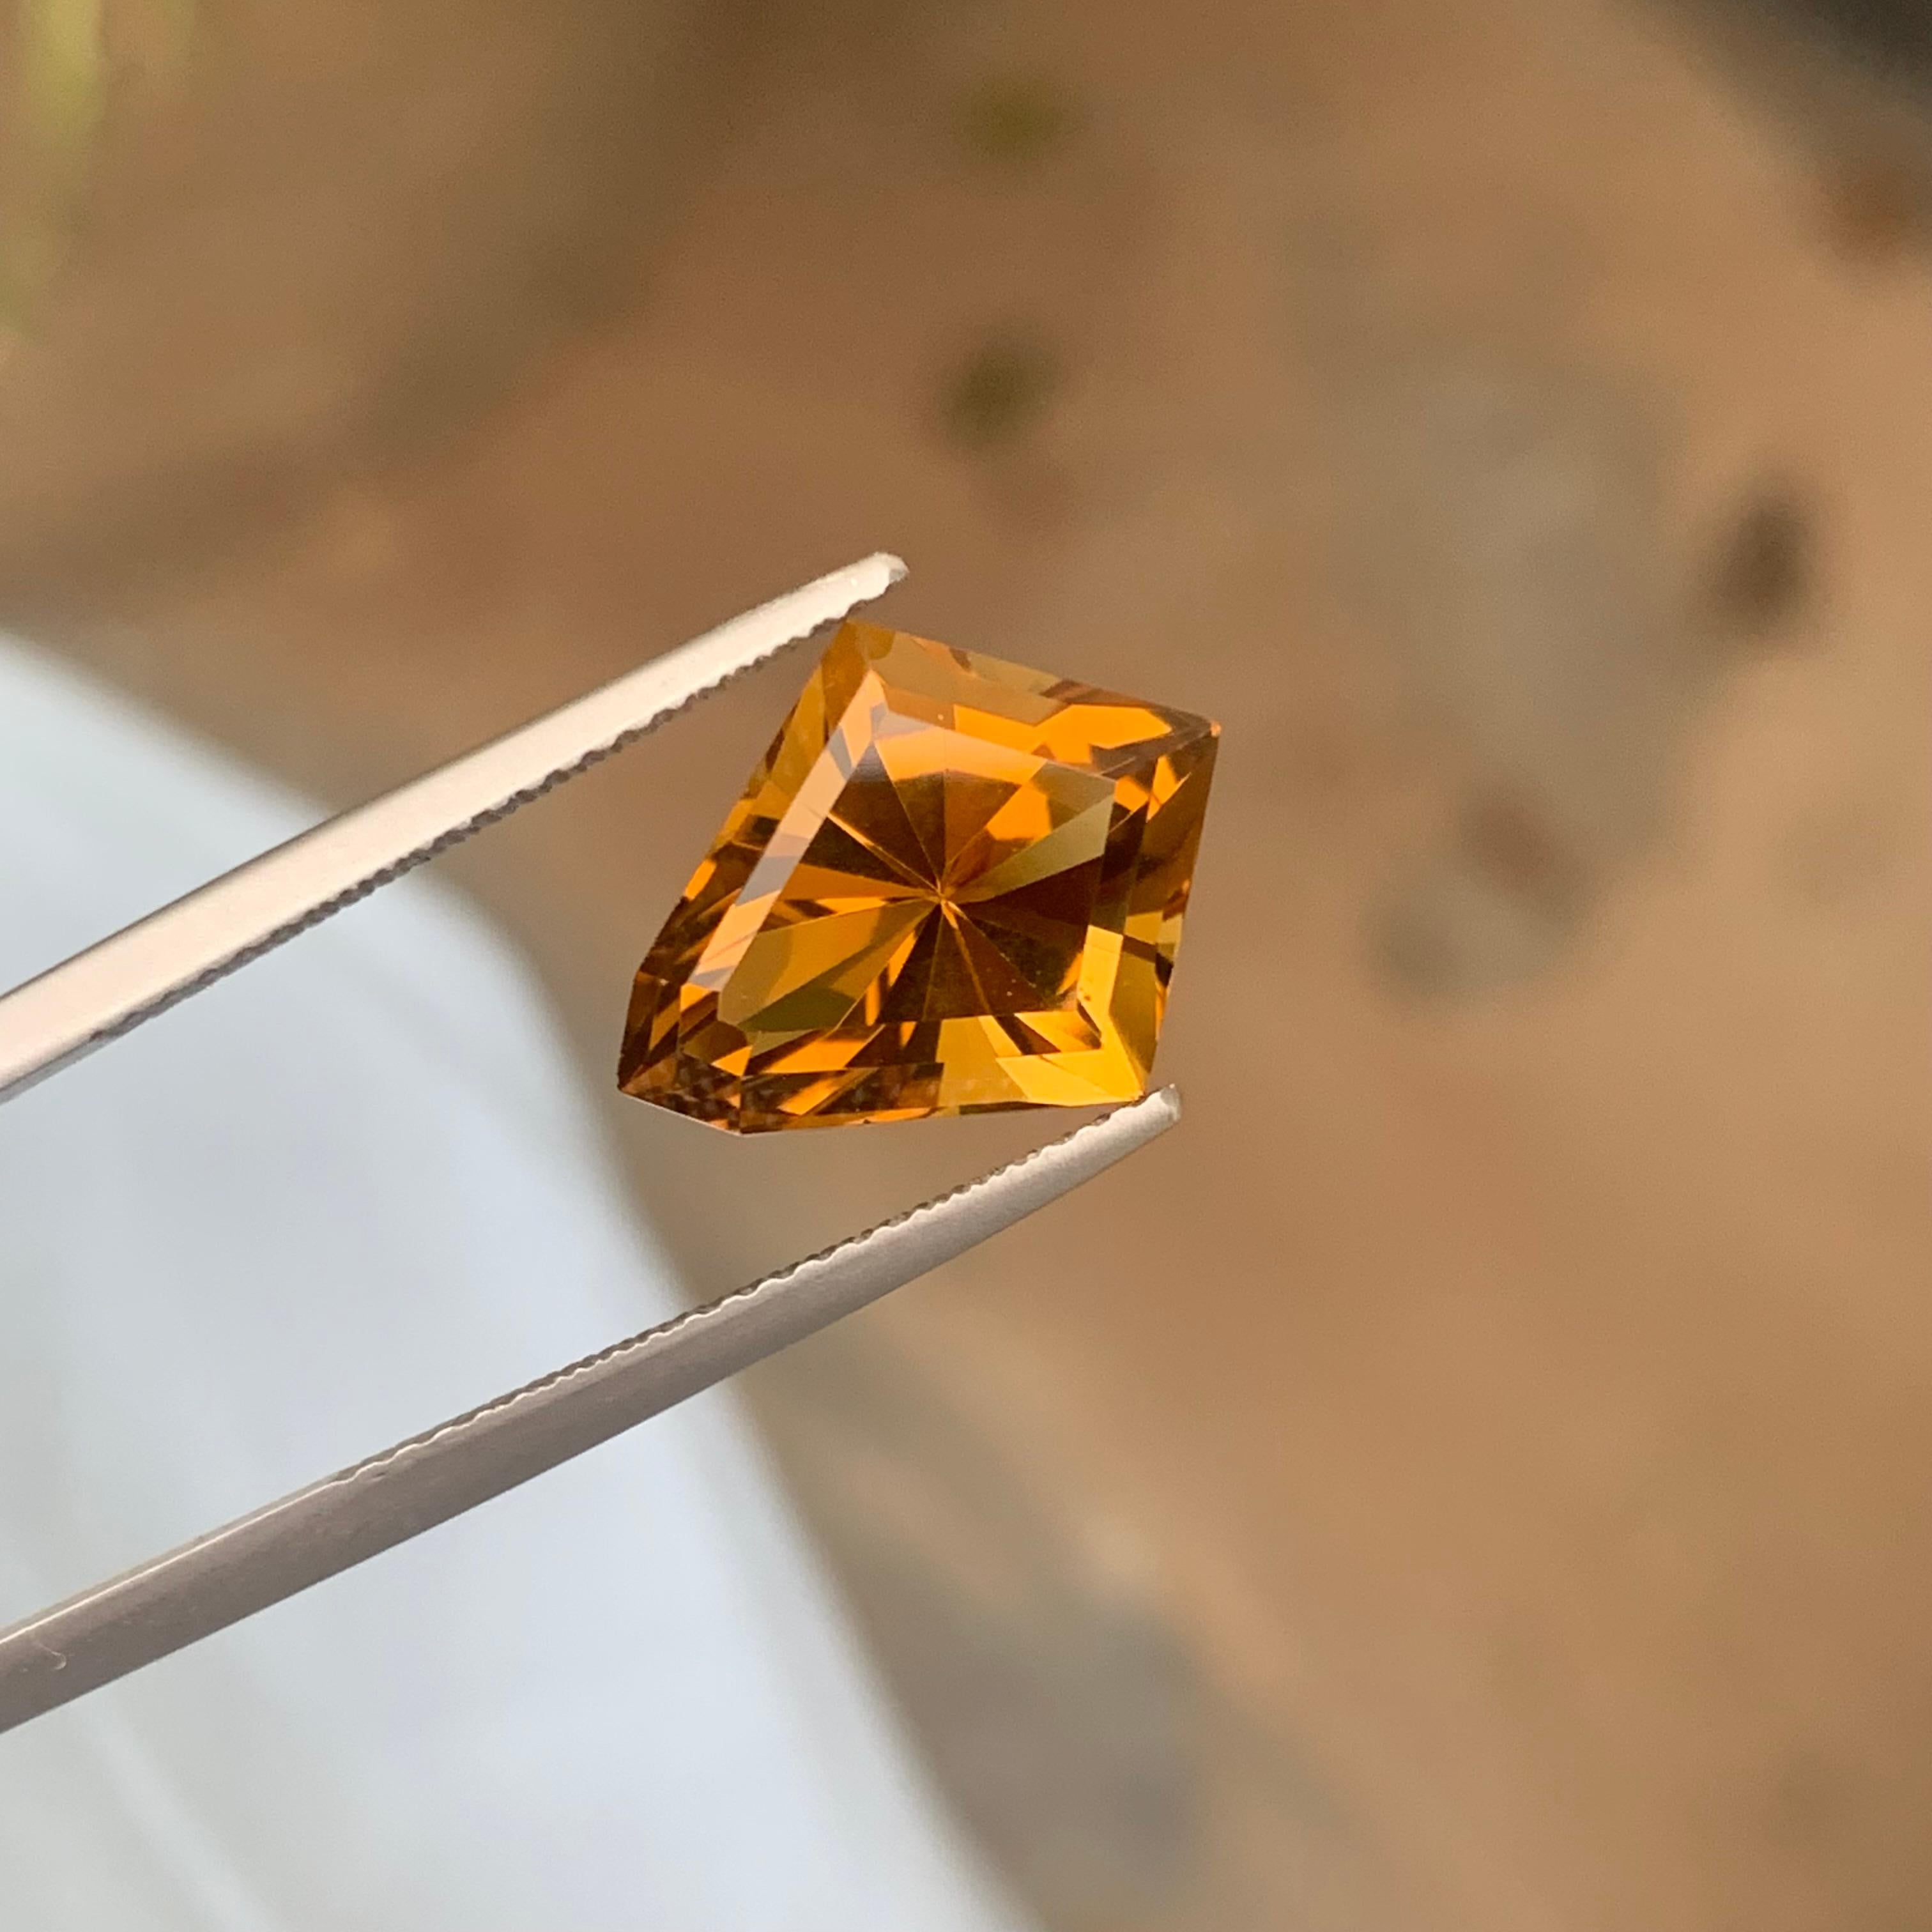 Faceted Honey Citrine
Weight : 4.80 Carats
Dimensions : 14.8x11.8x7.6 Mm
Clarity : Eye Clean 
Origin : Brazil
Color: Yellow
Shape: Kite
Certificate: On Demand
Month: November
.
The Many Healing Properties of Citrine
Increase Optimism, And Sunny